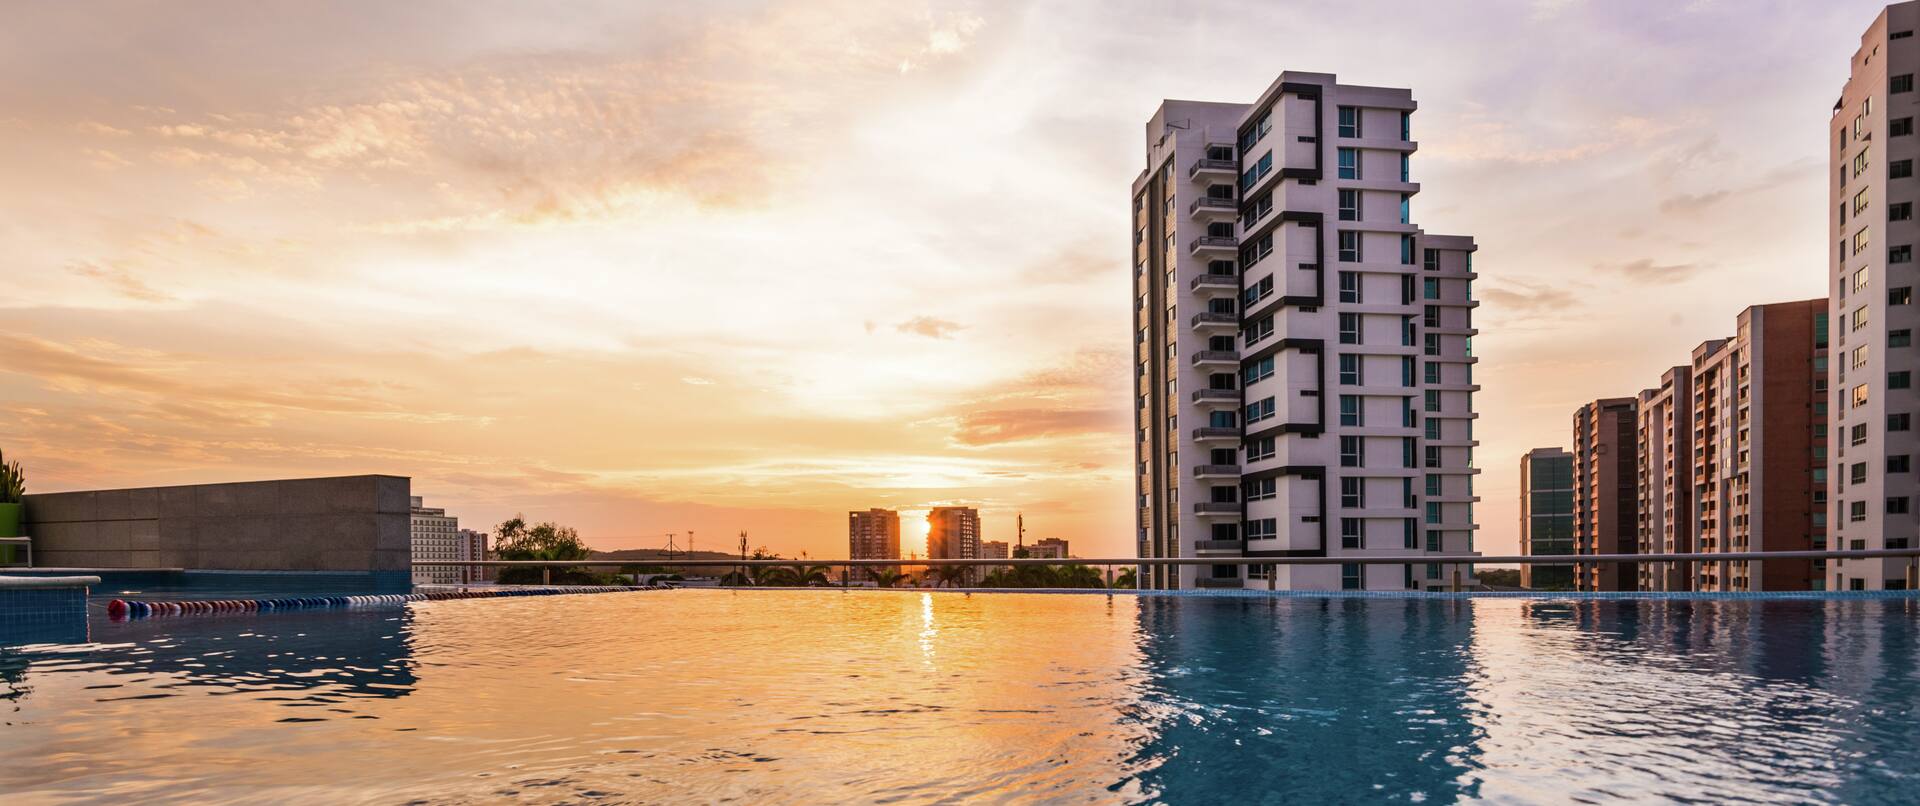 Infinity pool with sunset and views of tall buildings